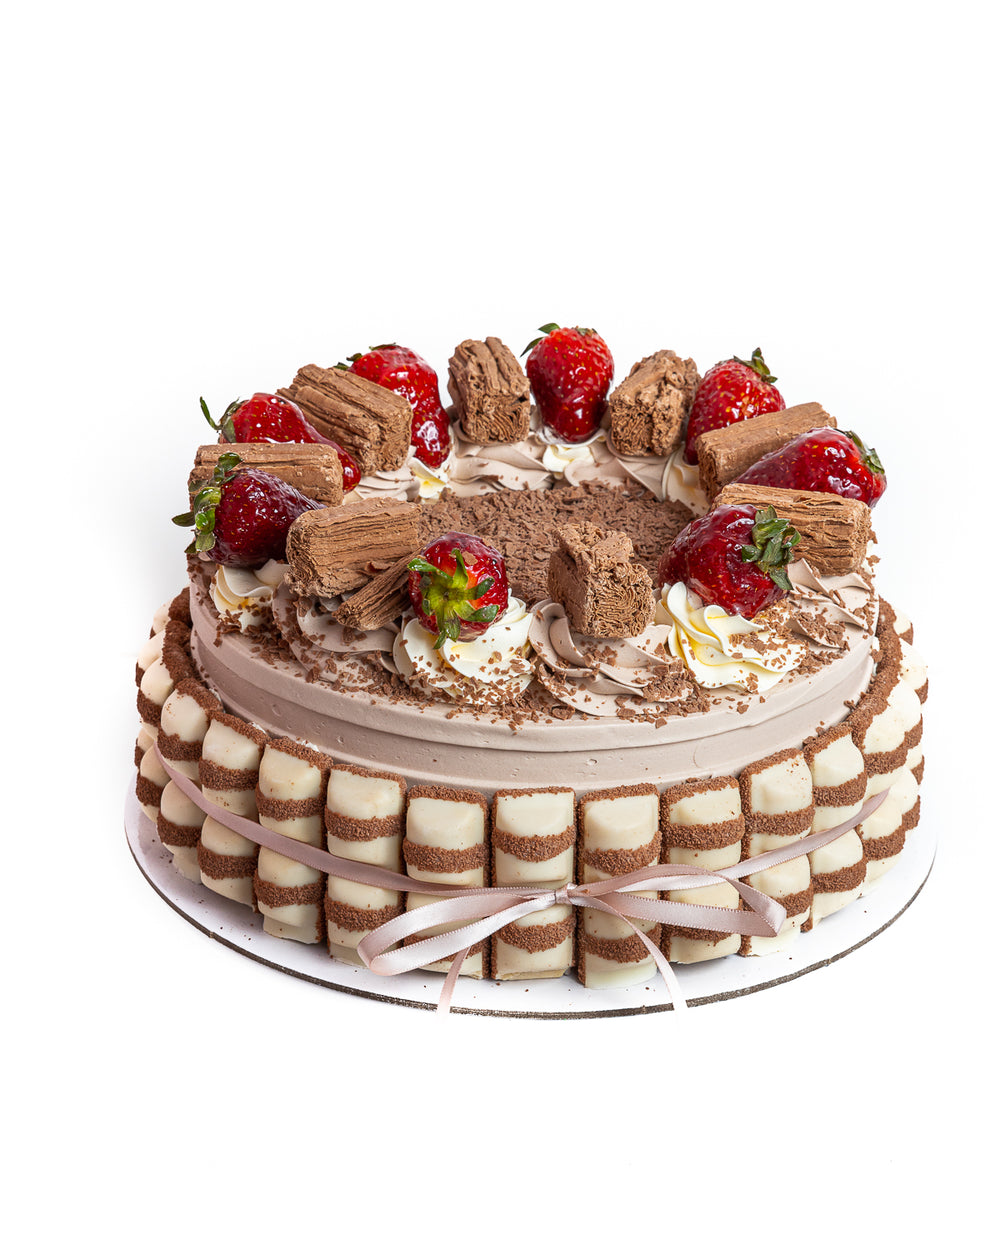 Kinder Bueno Cake - All Homemade Cakes - 100% homemade cakes and Greek pies  in Birmingham, made to order.